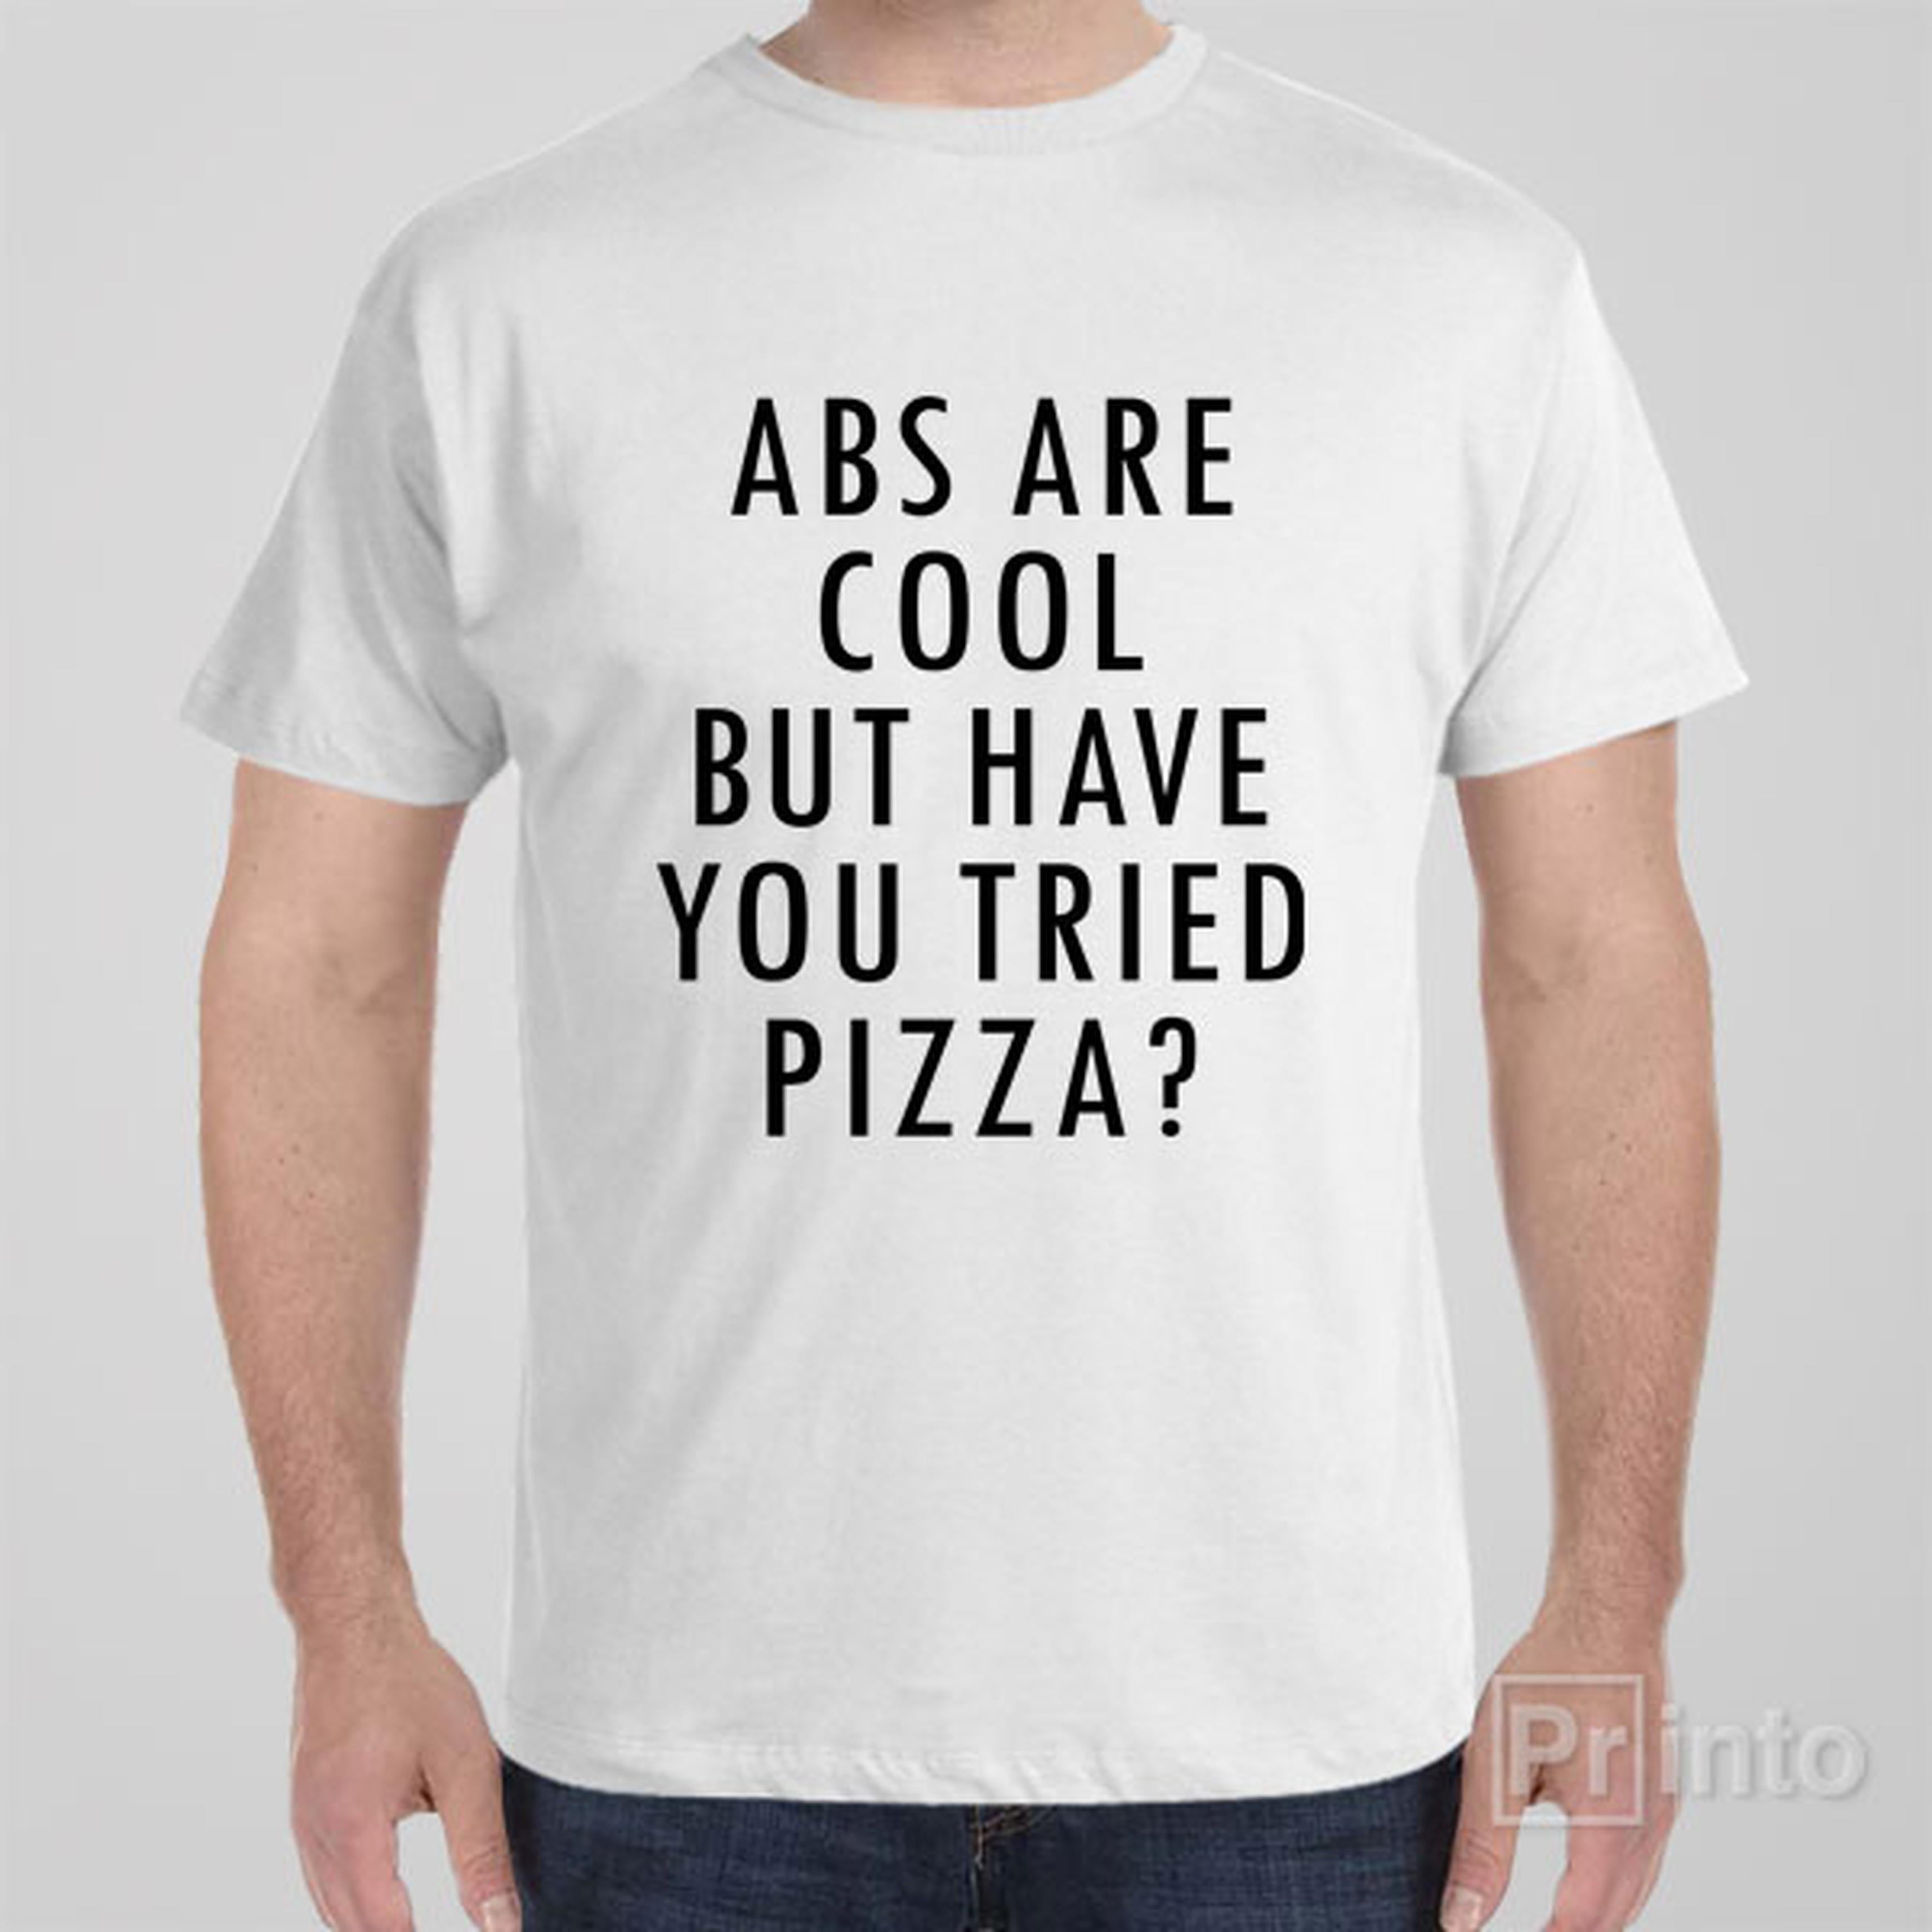 abs-are-great-but-have-you-tried-pizza-t-shirt